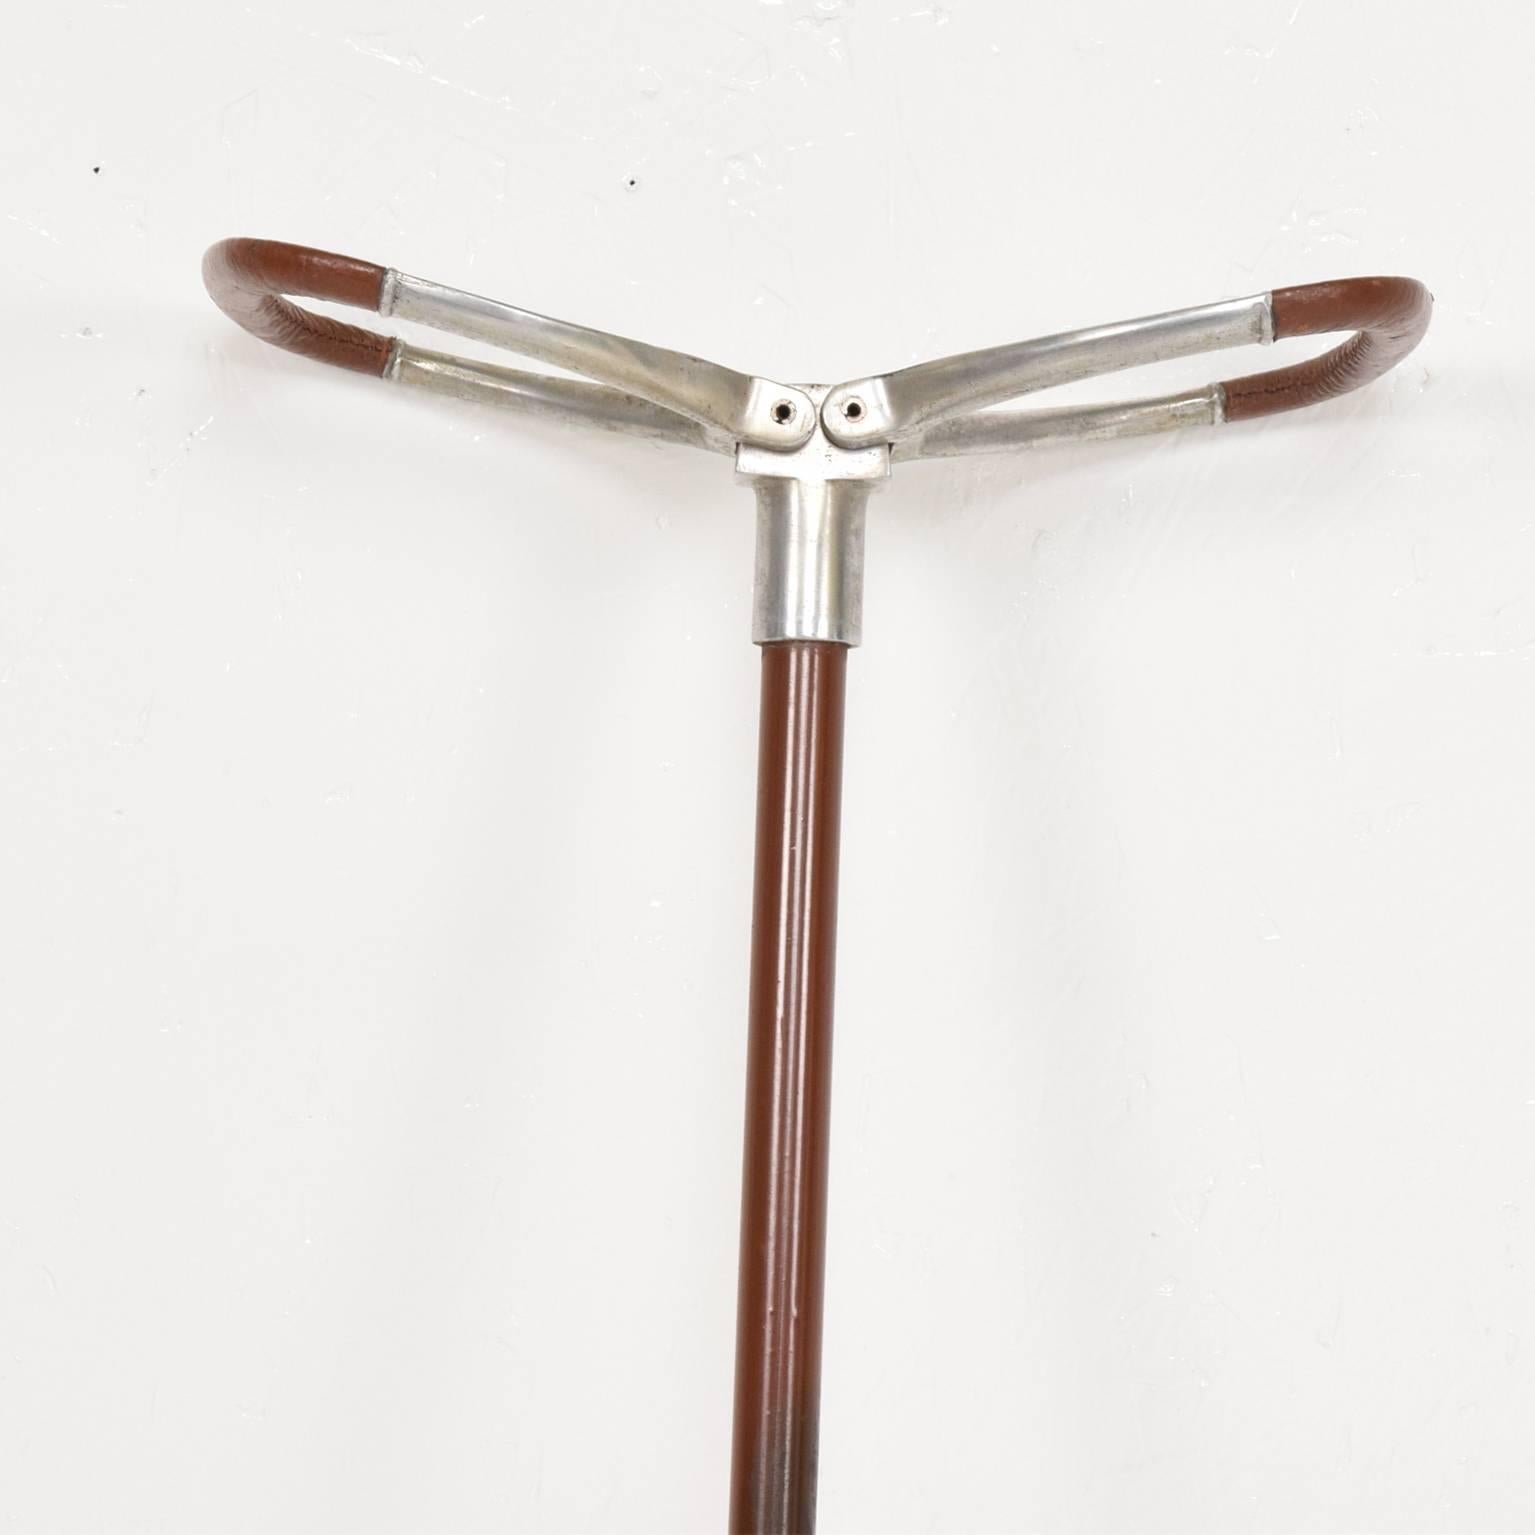 Aluminium and leather walking cane with folding seat, England, 1960s.
By Abercrombie And Fitch